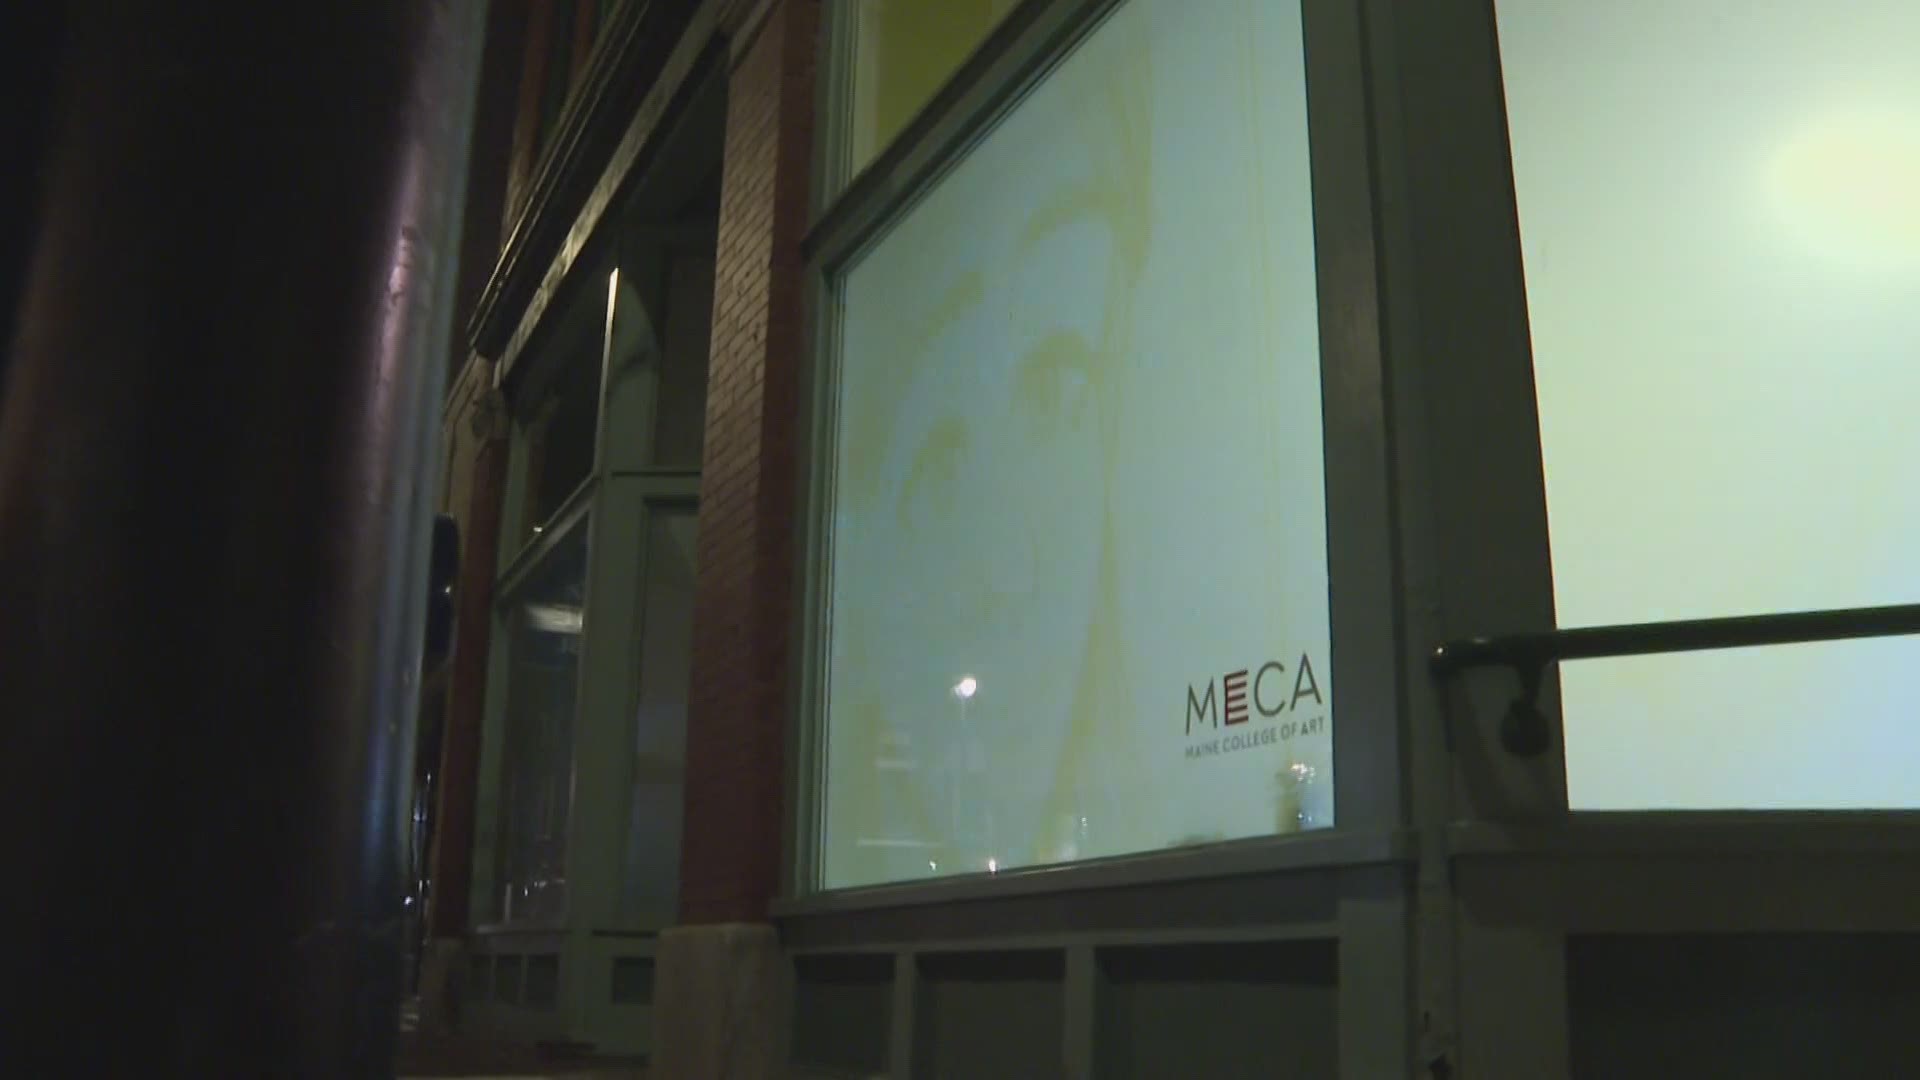 MECA’s ‘Project Project’ highlights student art in a socially distanced setting